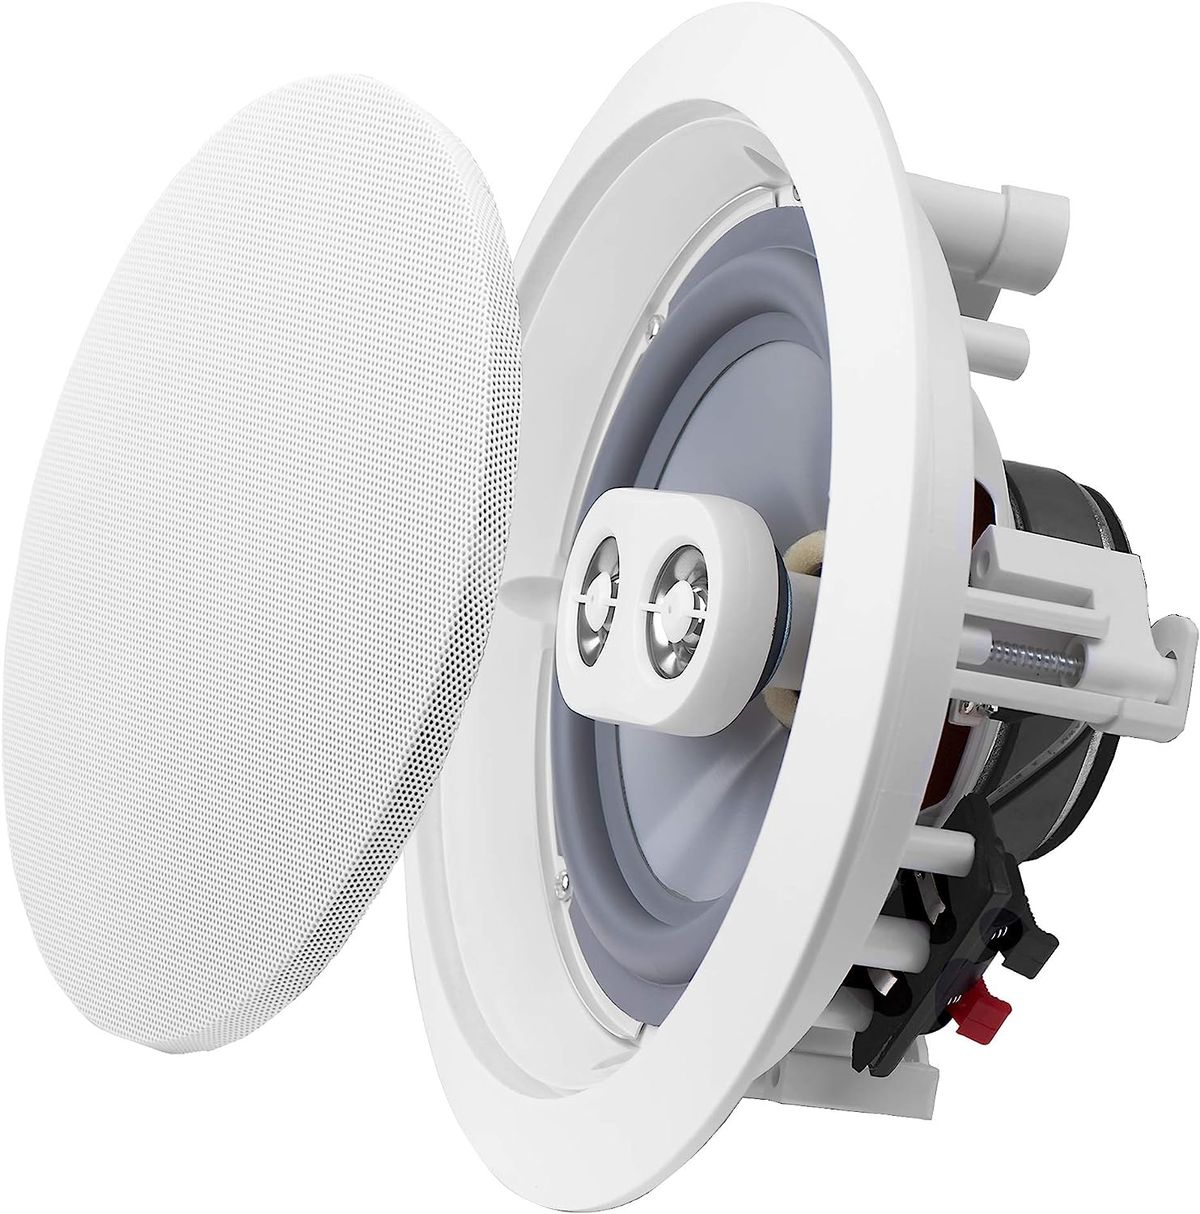 Enhance Your Outdoor Entertainment with Weatherproof Ceiling Speakers